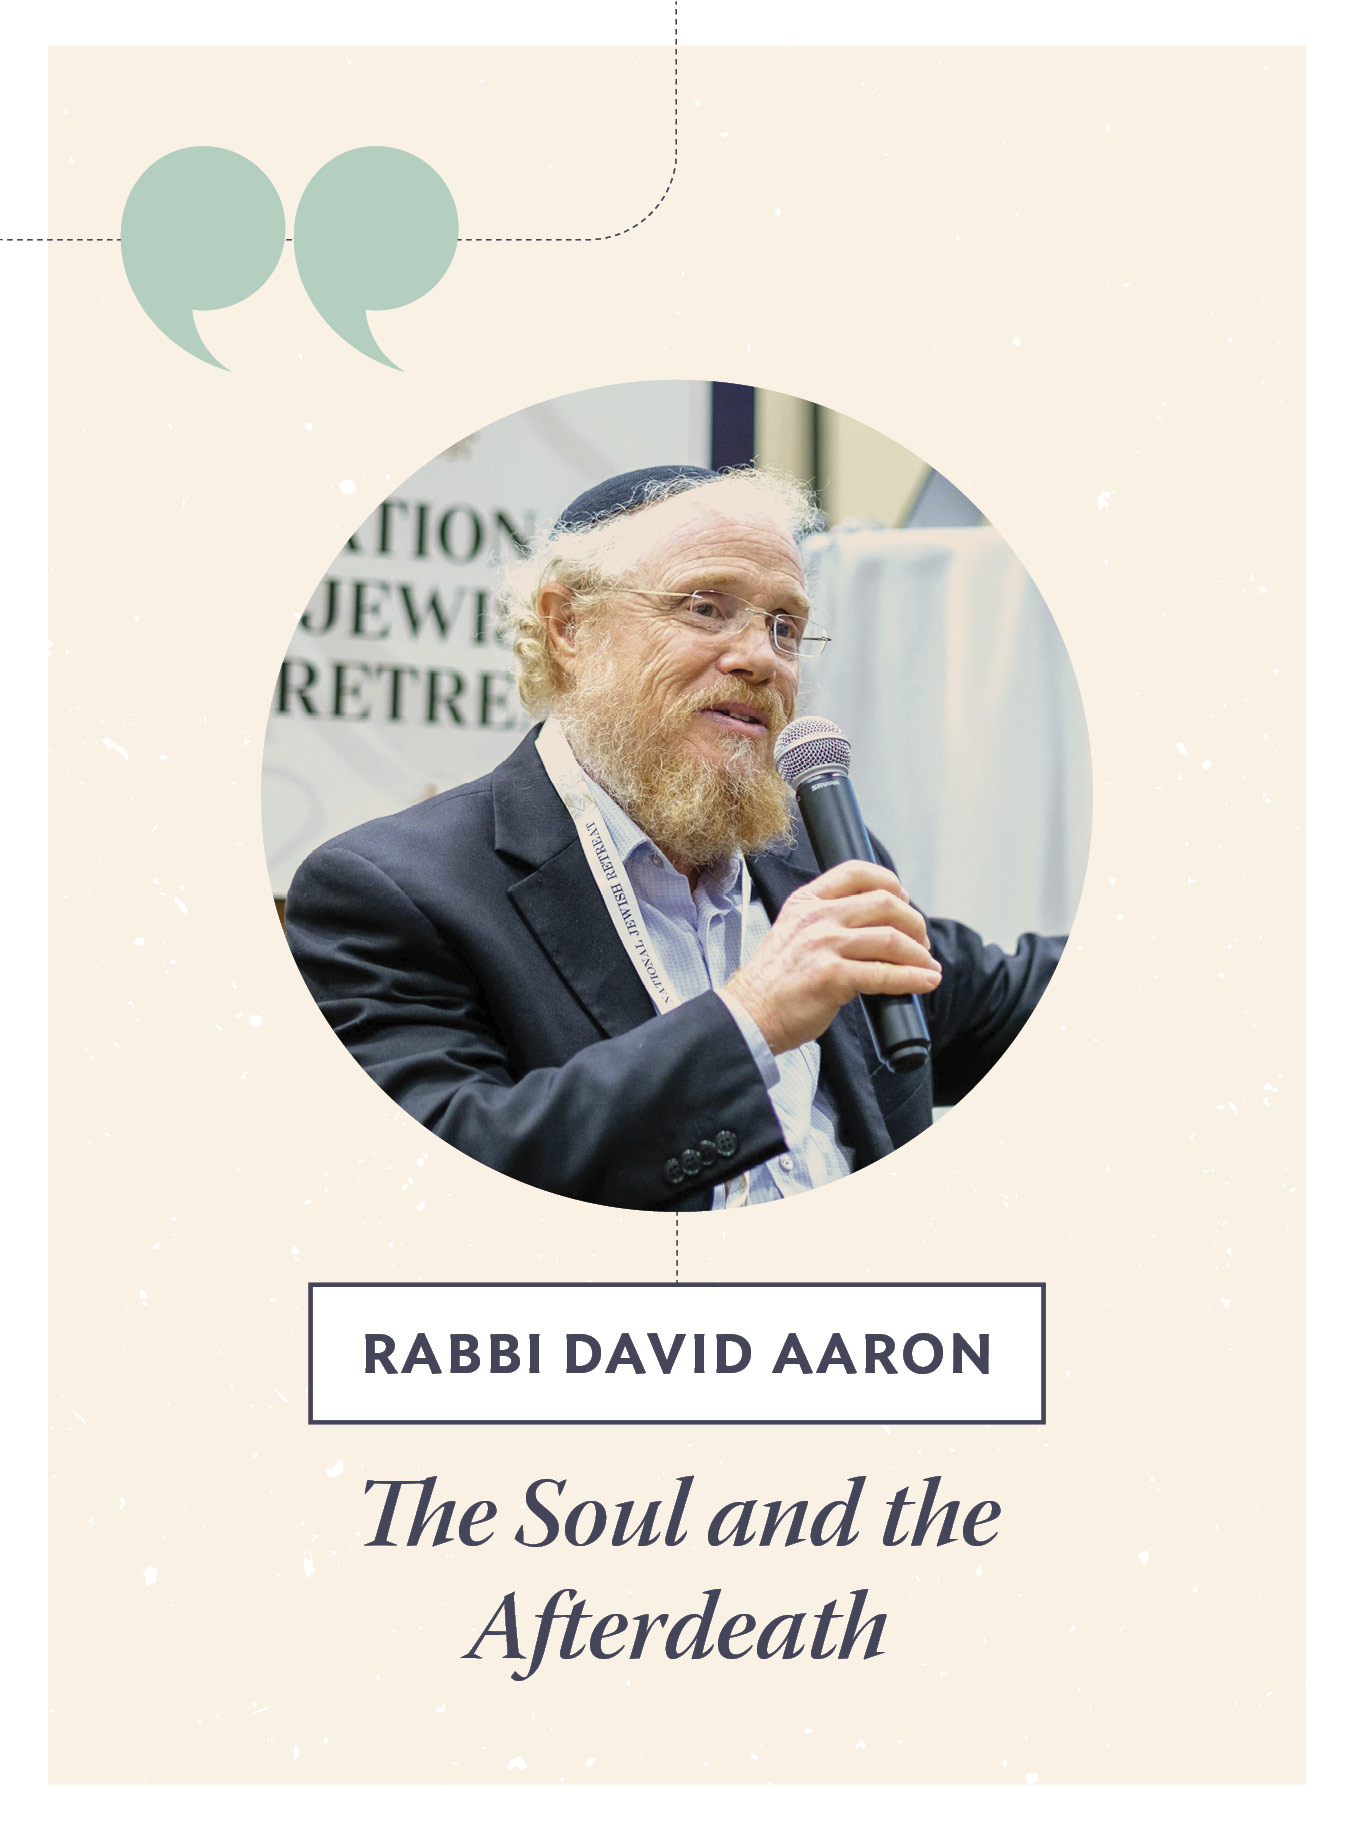 The Soul and the After Death - Rabbi David Aaron